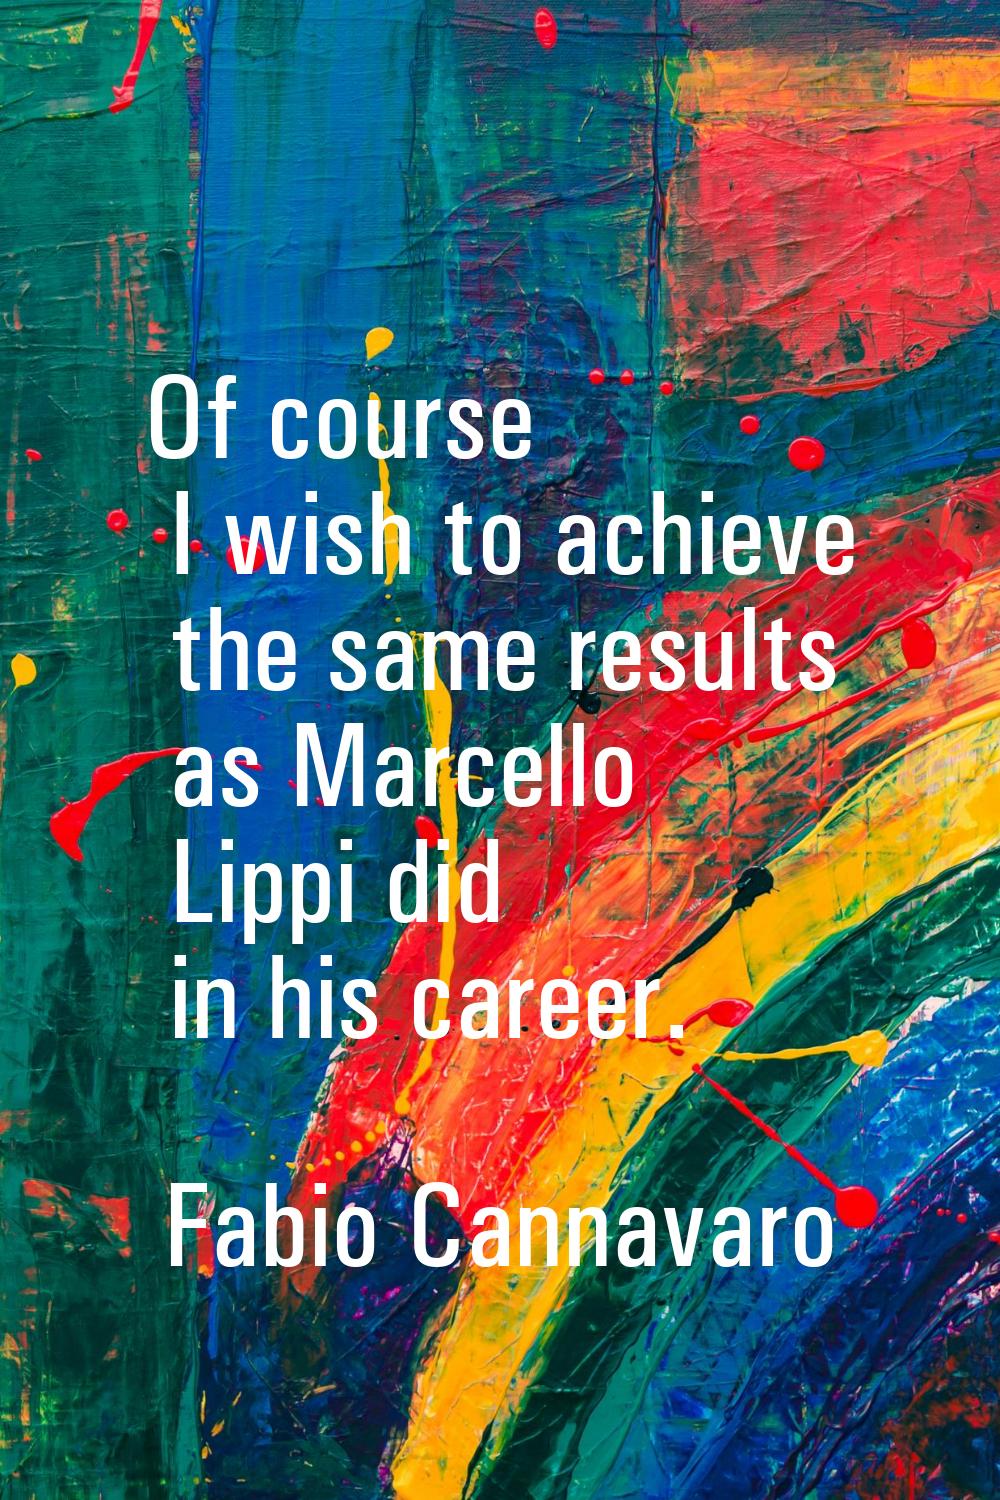 Of course I wish to achieve the same results as Marcello Lippi did in his career.